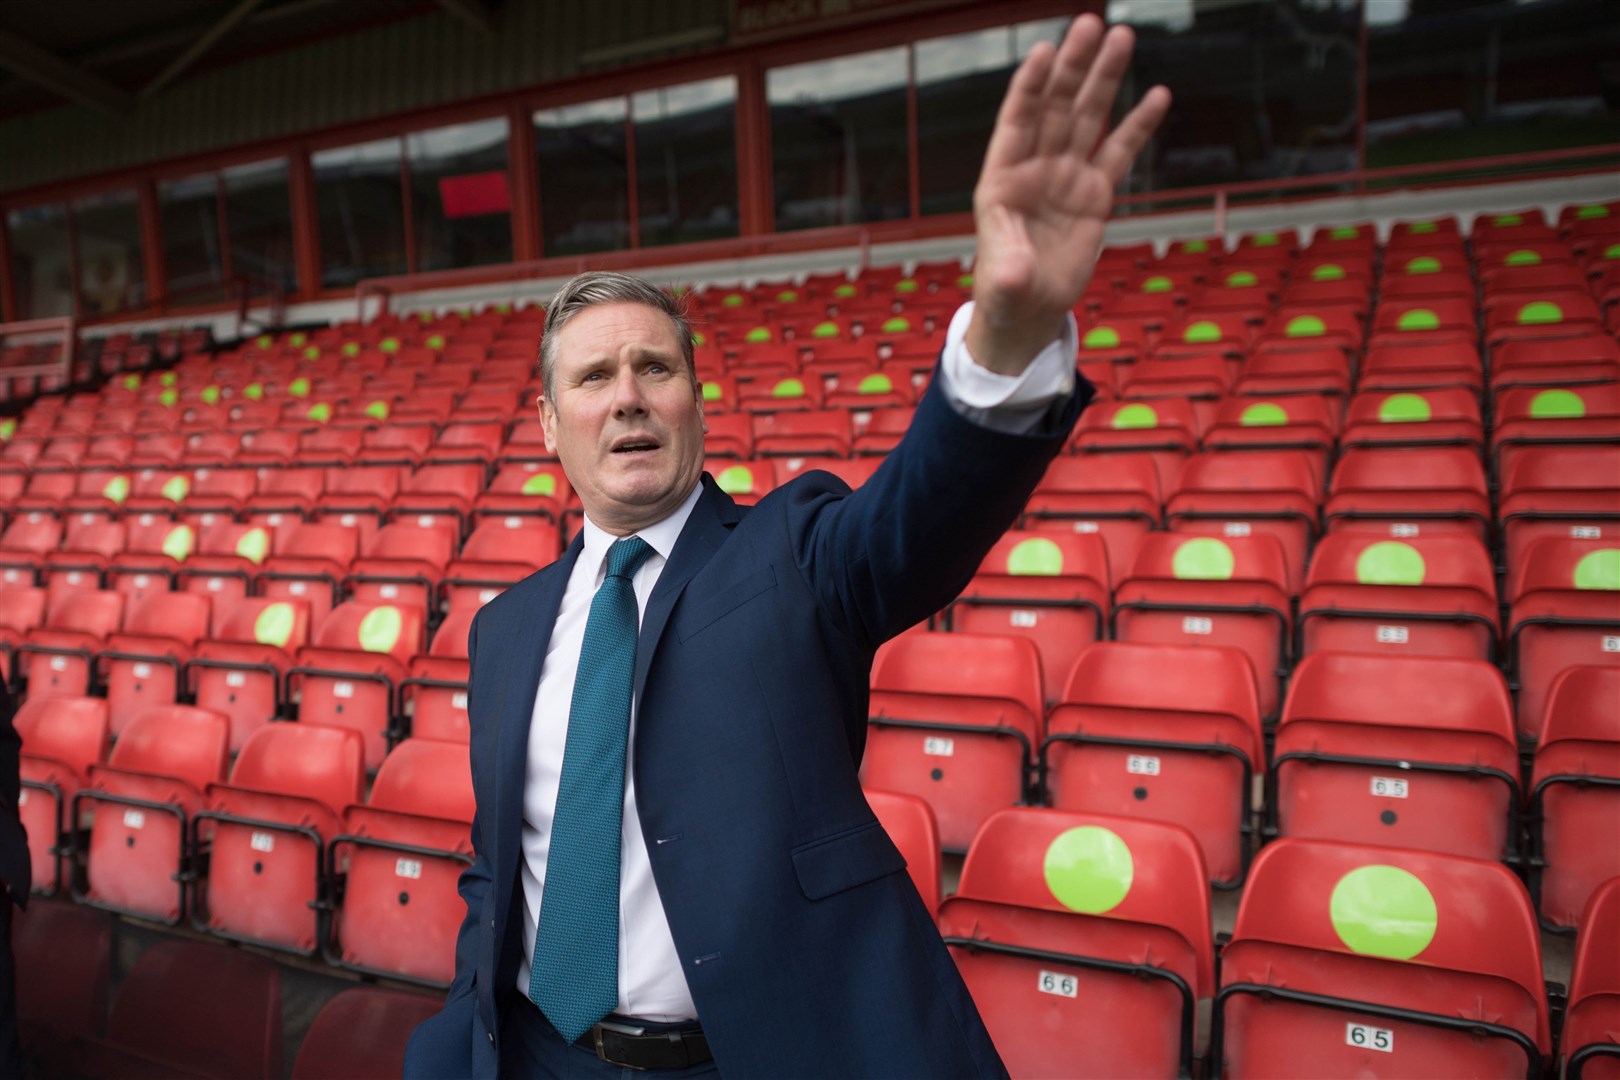 Sir Keir Starmer during a visit to Walsall’s Banks Stadium (Stefan Rousseau/PA)